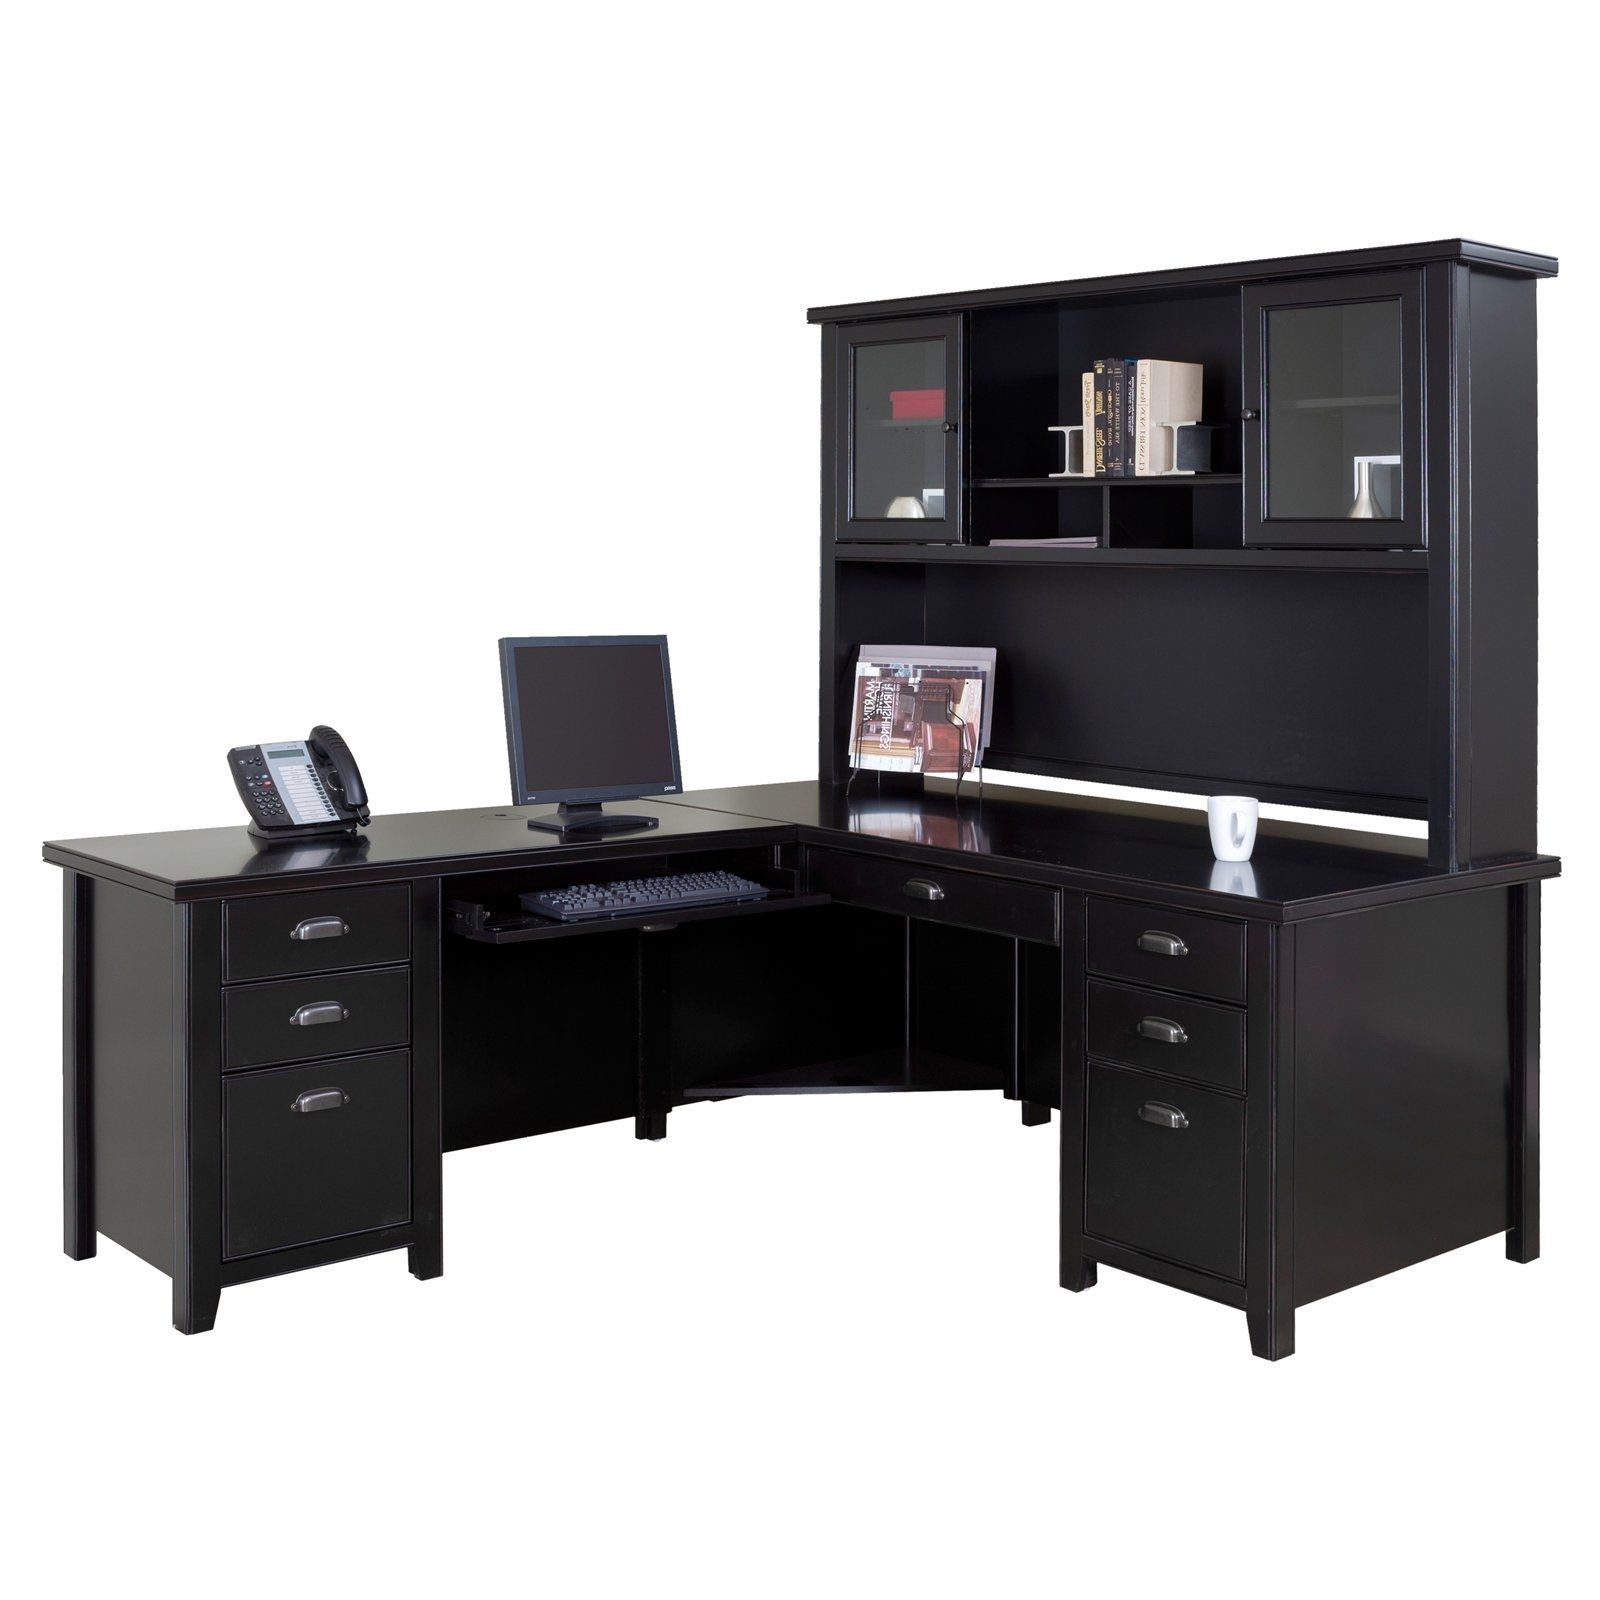 Black L Shaped Desk Amazon – Thediapercake Home Trend Intended For Most Current Amazon Computer Desks (View 8 of 20)